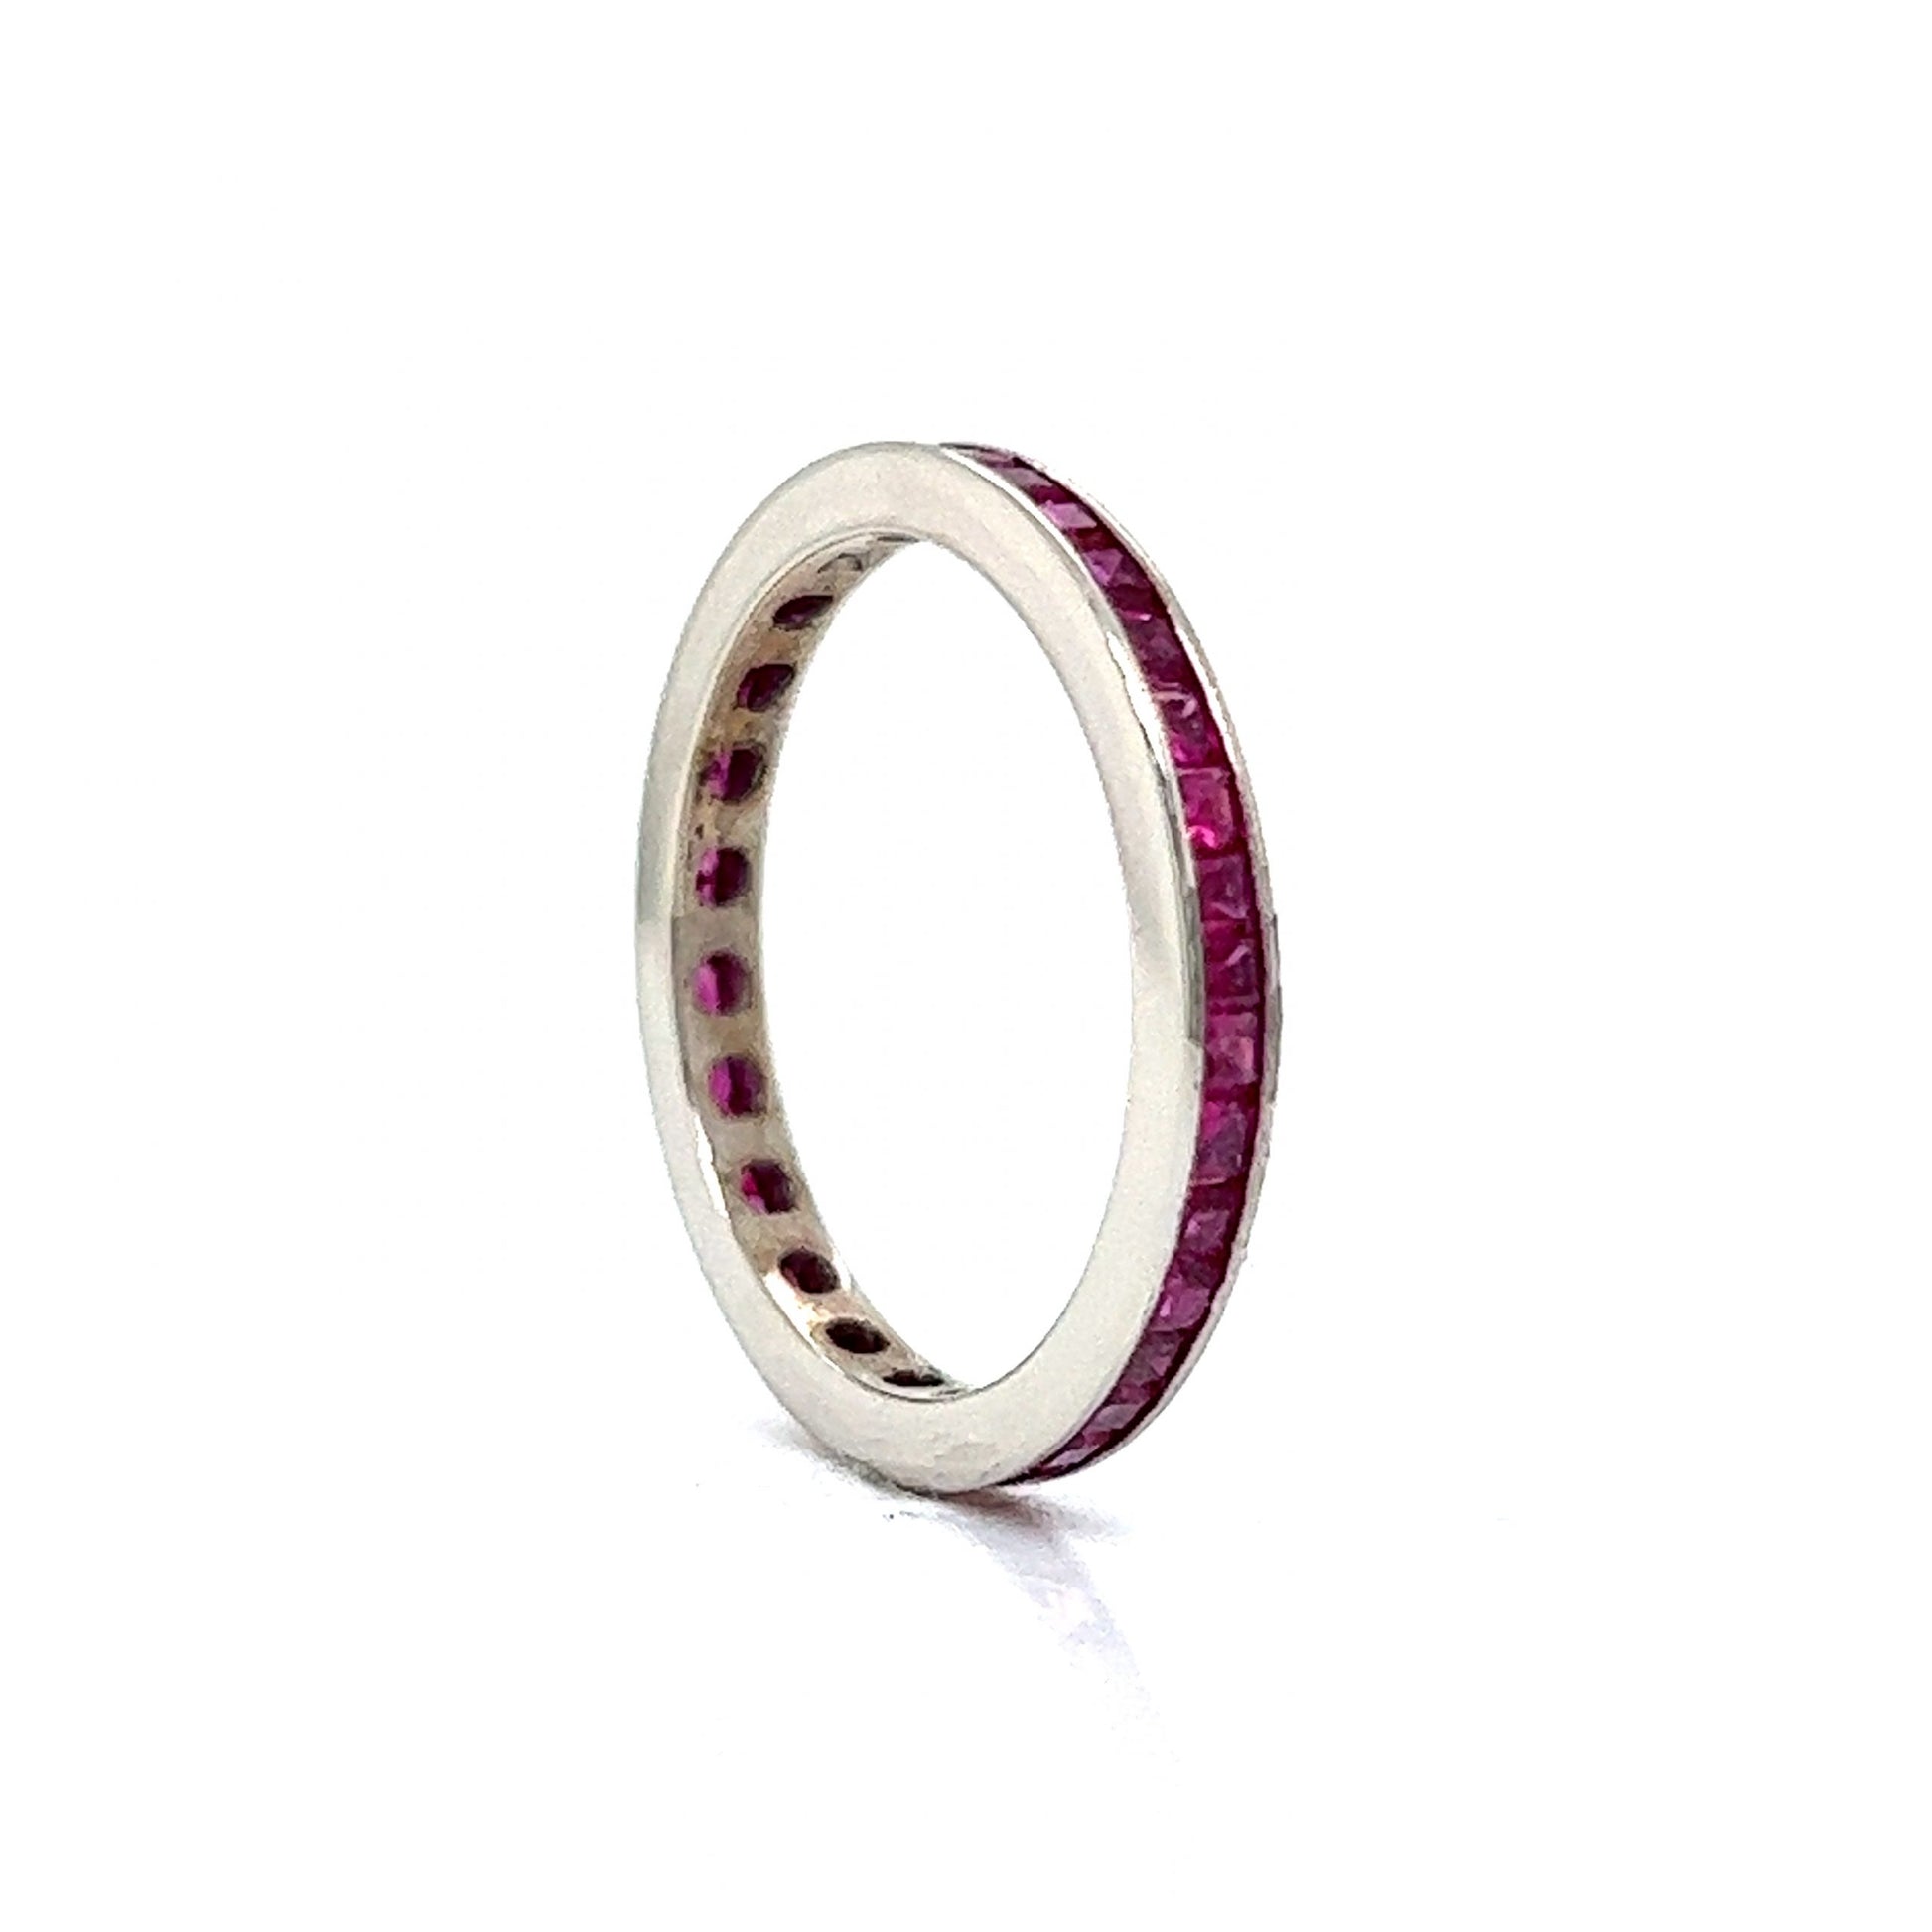 2mm Channel Set Ruby Eternity Wedding Band in 14k White Gold